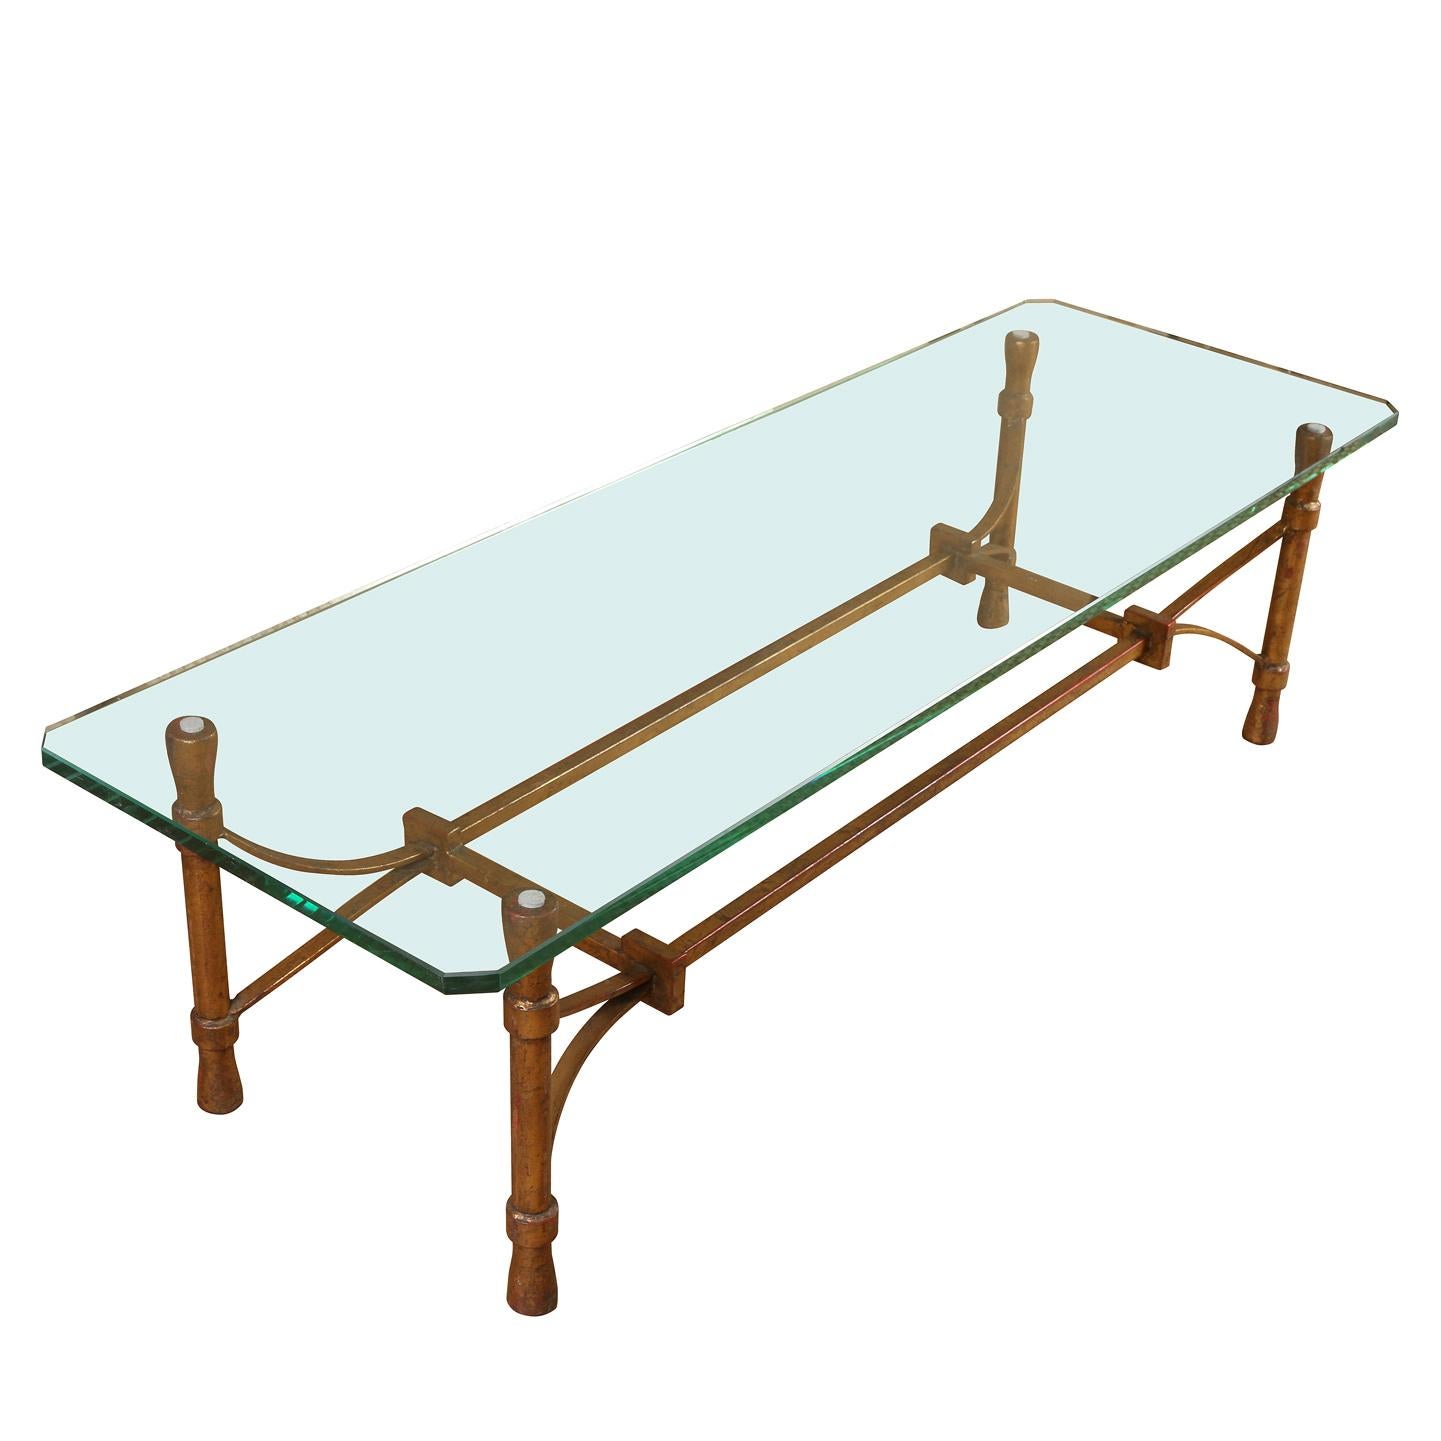 A modernist gilt iron and glass coffee table. The base is constructed of gilt forged iron in modernist style with four cylindrical legs and an open rectangular gilt iron design. The glass top has rounded corners.